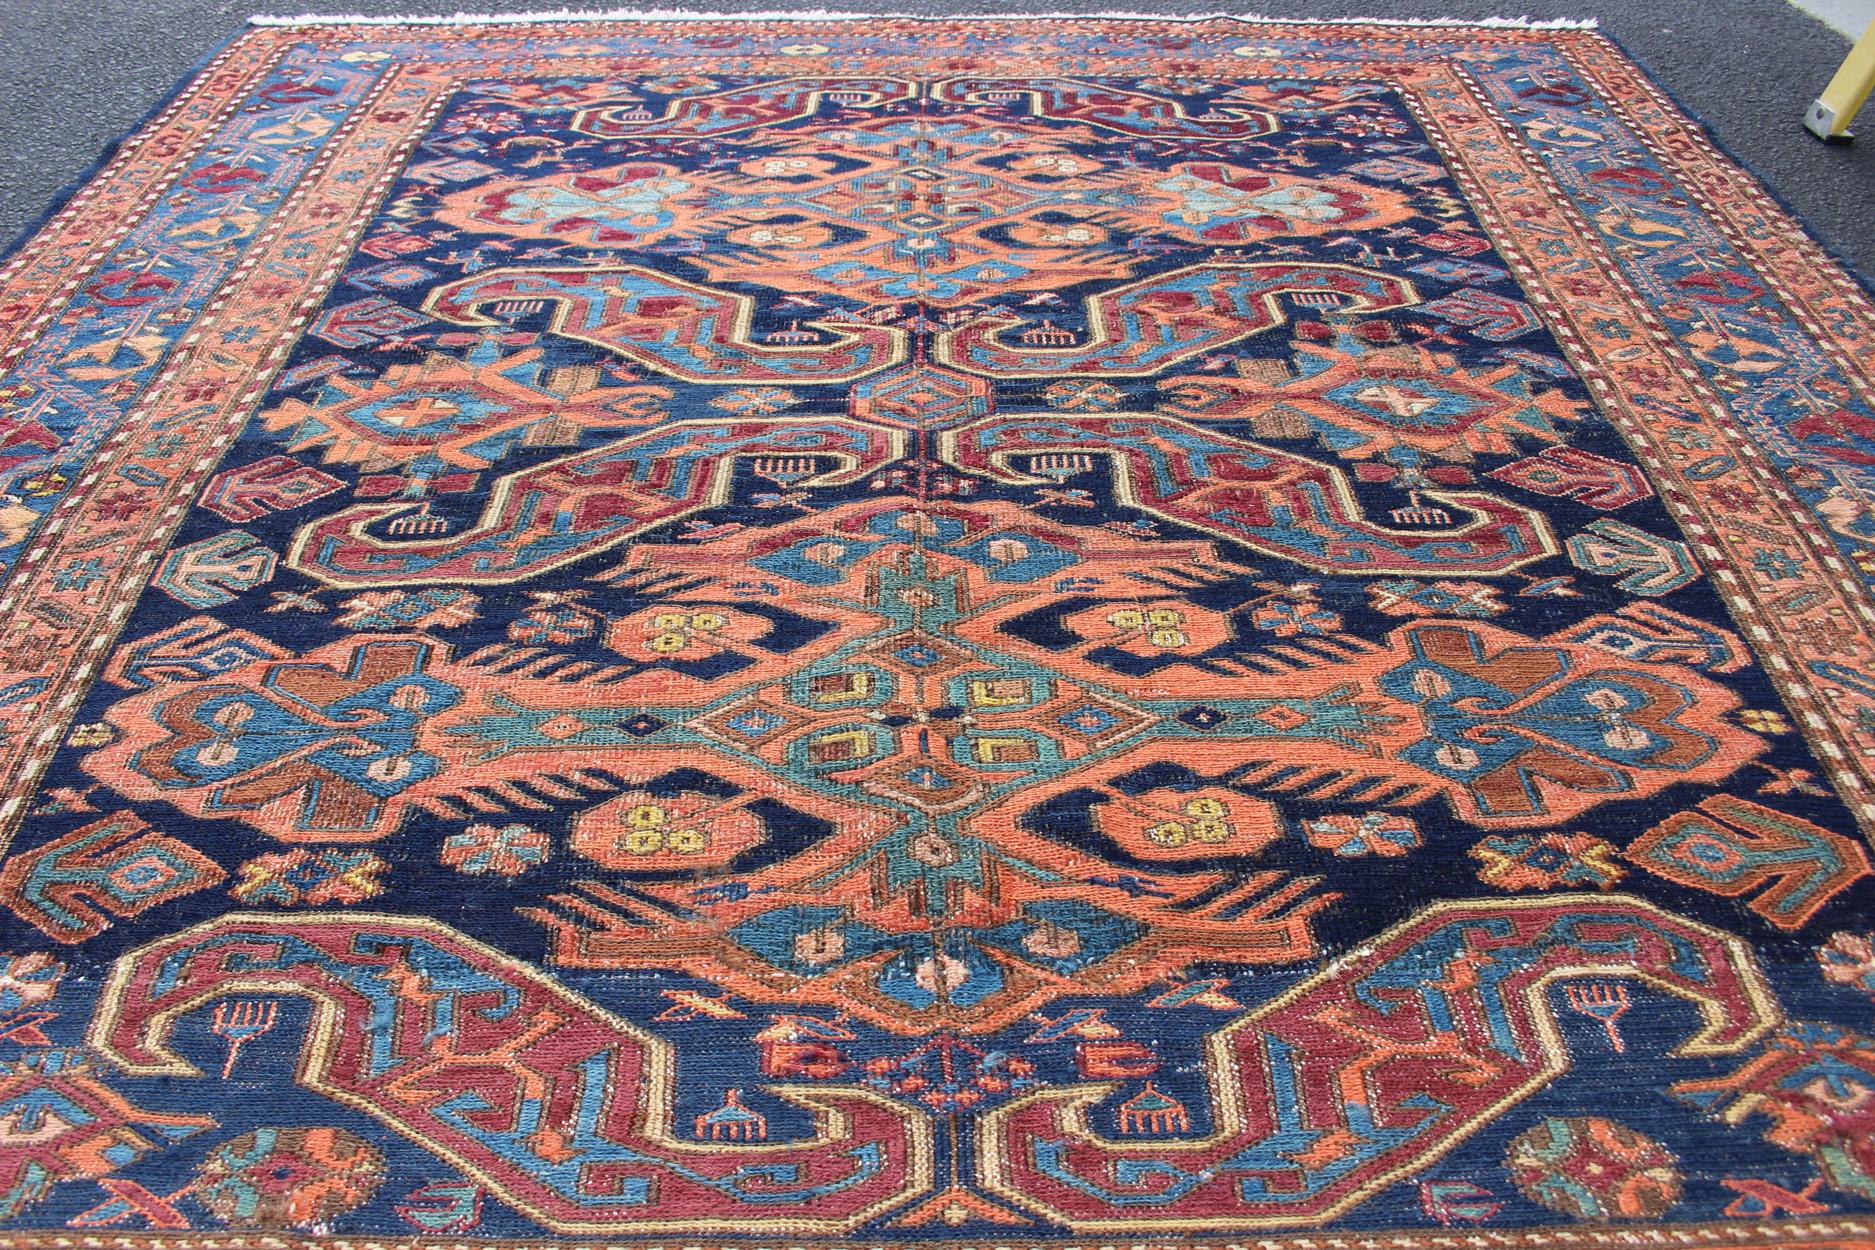 Early 20th Century Antique Caucasian 19th Century Sumac Rug in Varying Colors of Orange and Blue For Sale